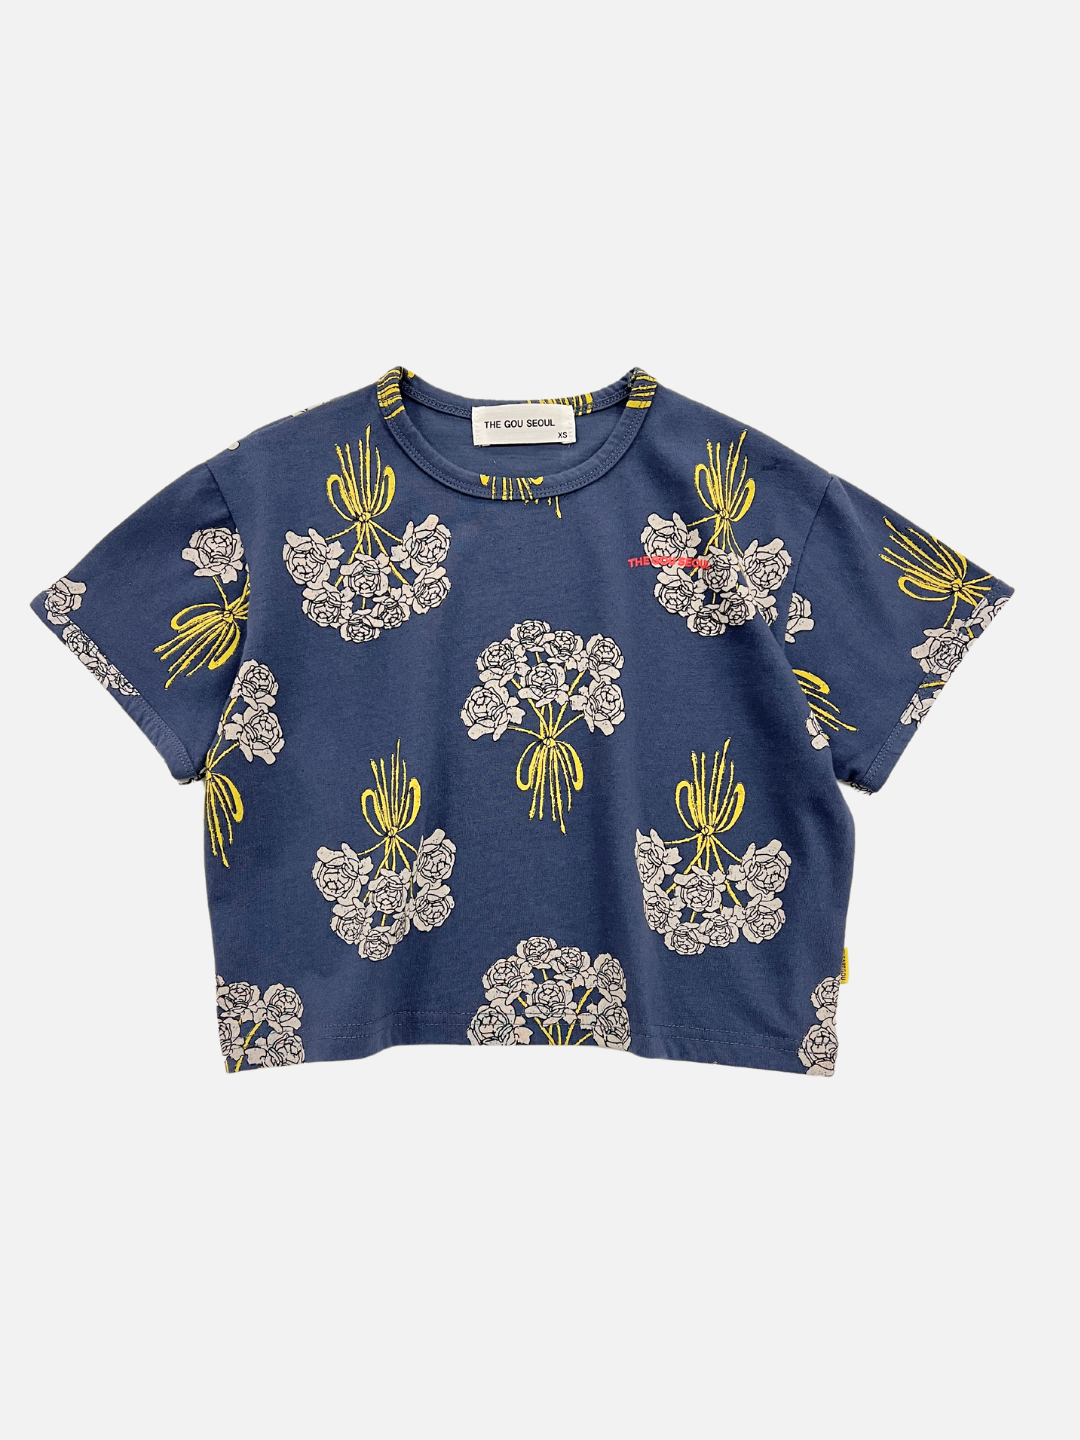 A front view of the kids' Bouquet Tee in Navy. Navy background with white bouquets of roses all over. The Gou Should logo in red on the right side of the tee. 